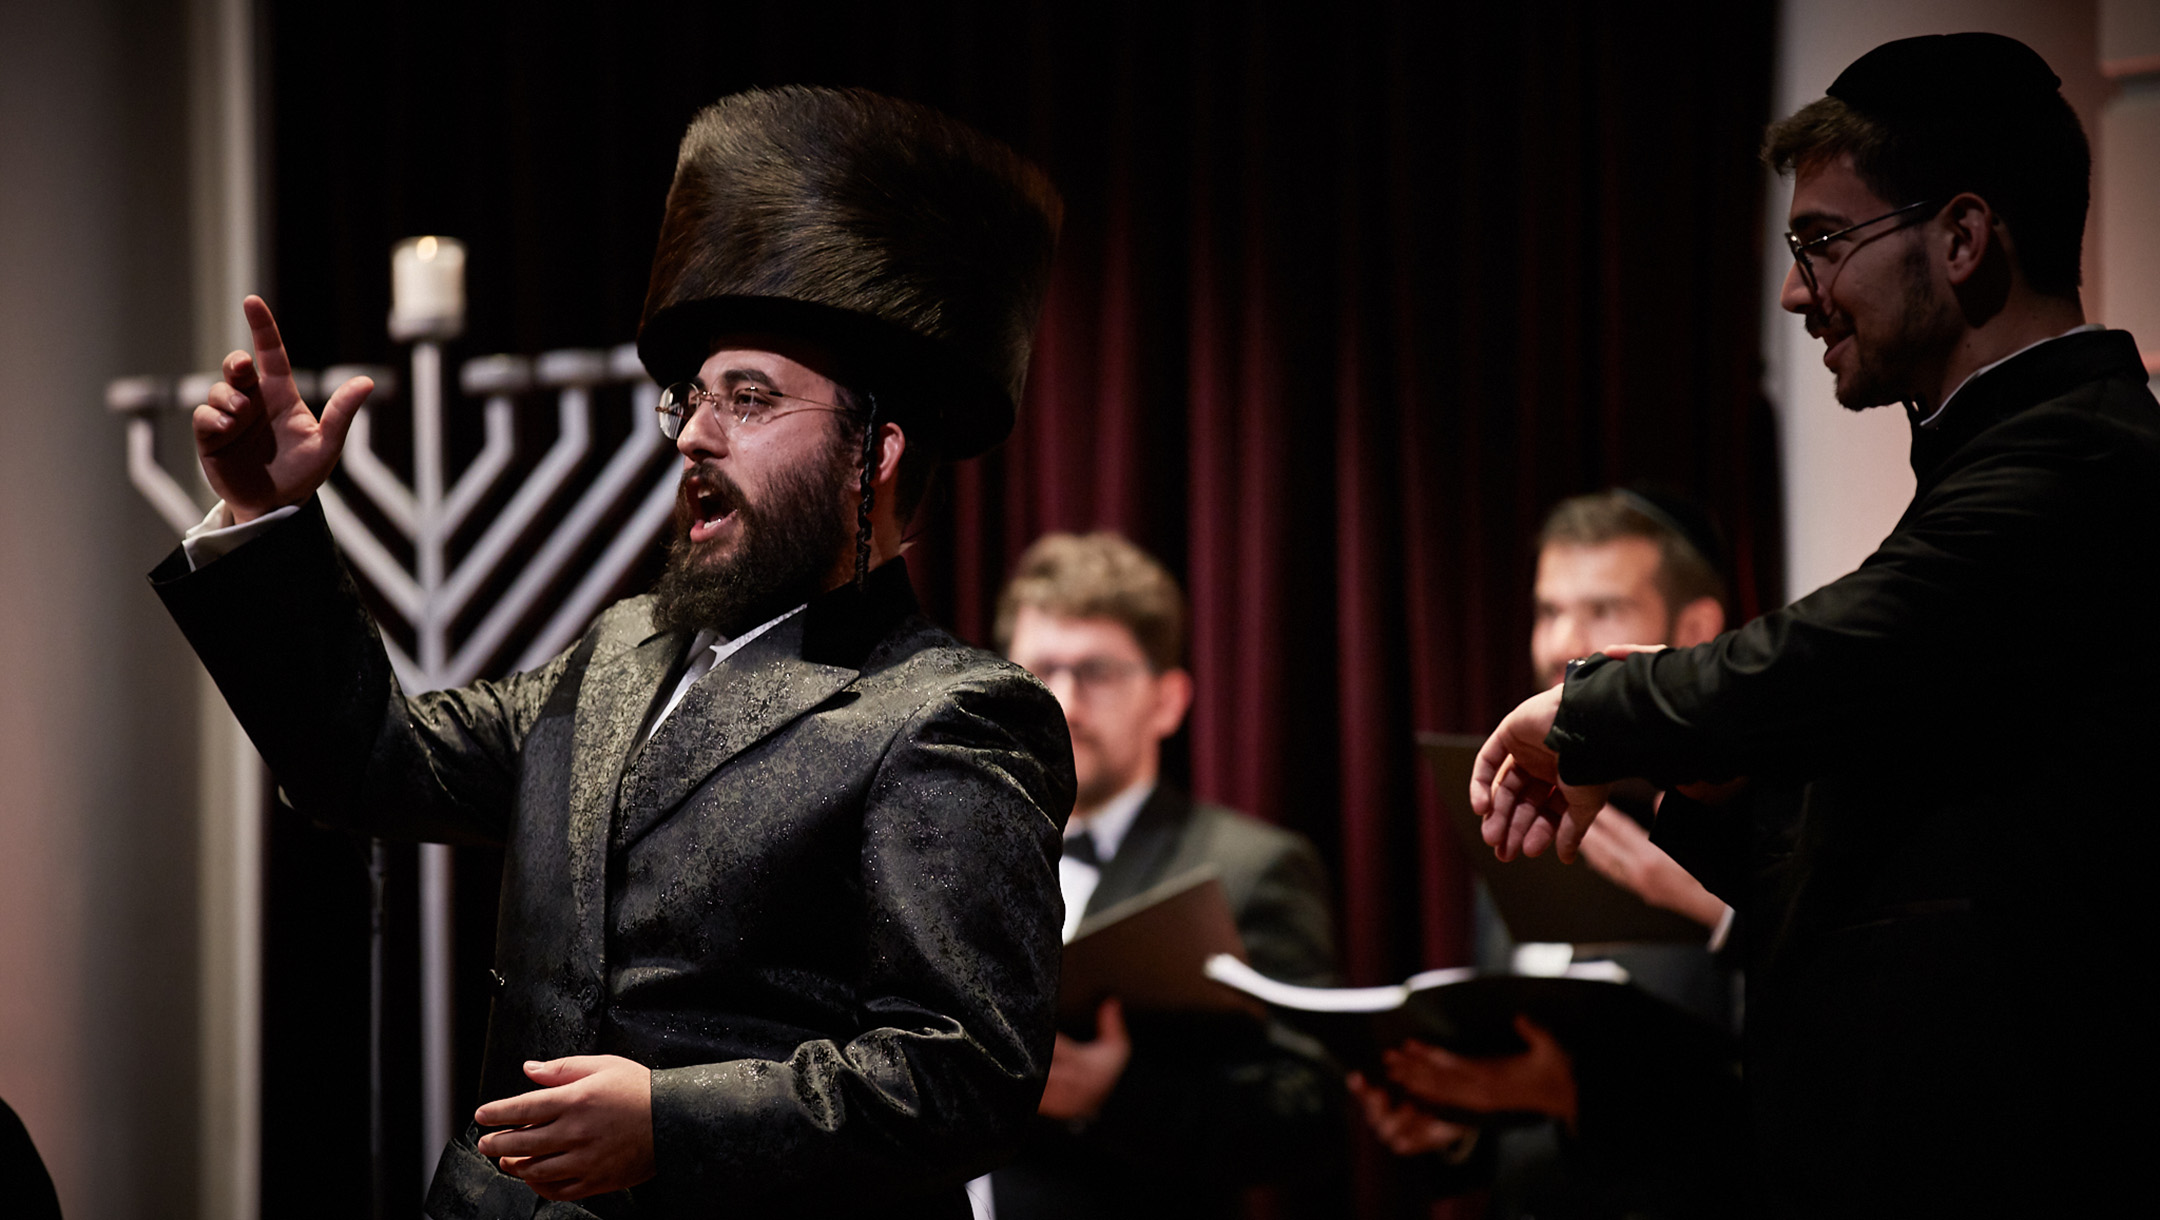 Cantor Israel Nachman performs at the annual Hanukkah event of the Royal Concert Hall in Amsterdam, the Netherlands on Dec. 22, 2019. (Eduardus Lee)